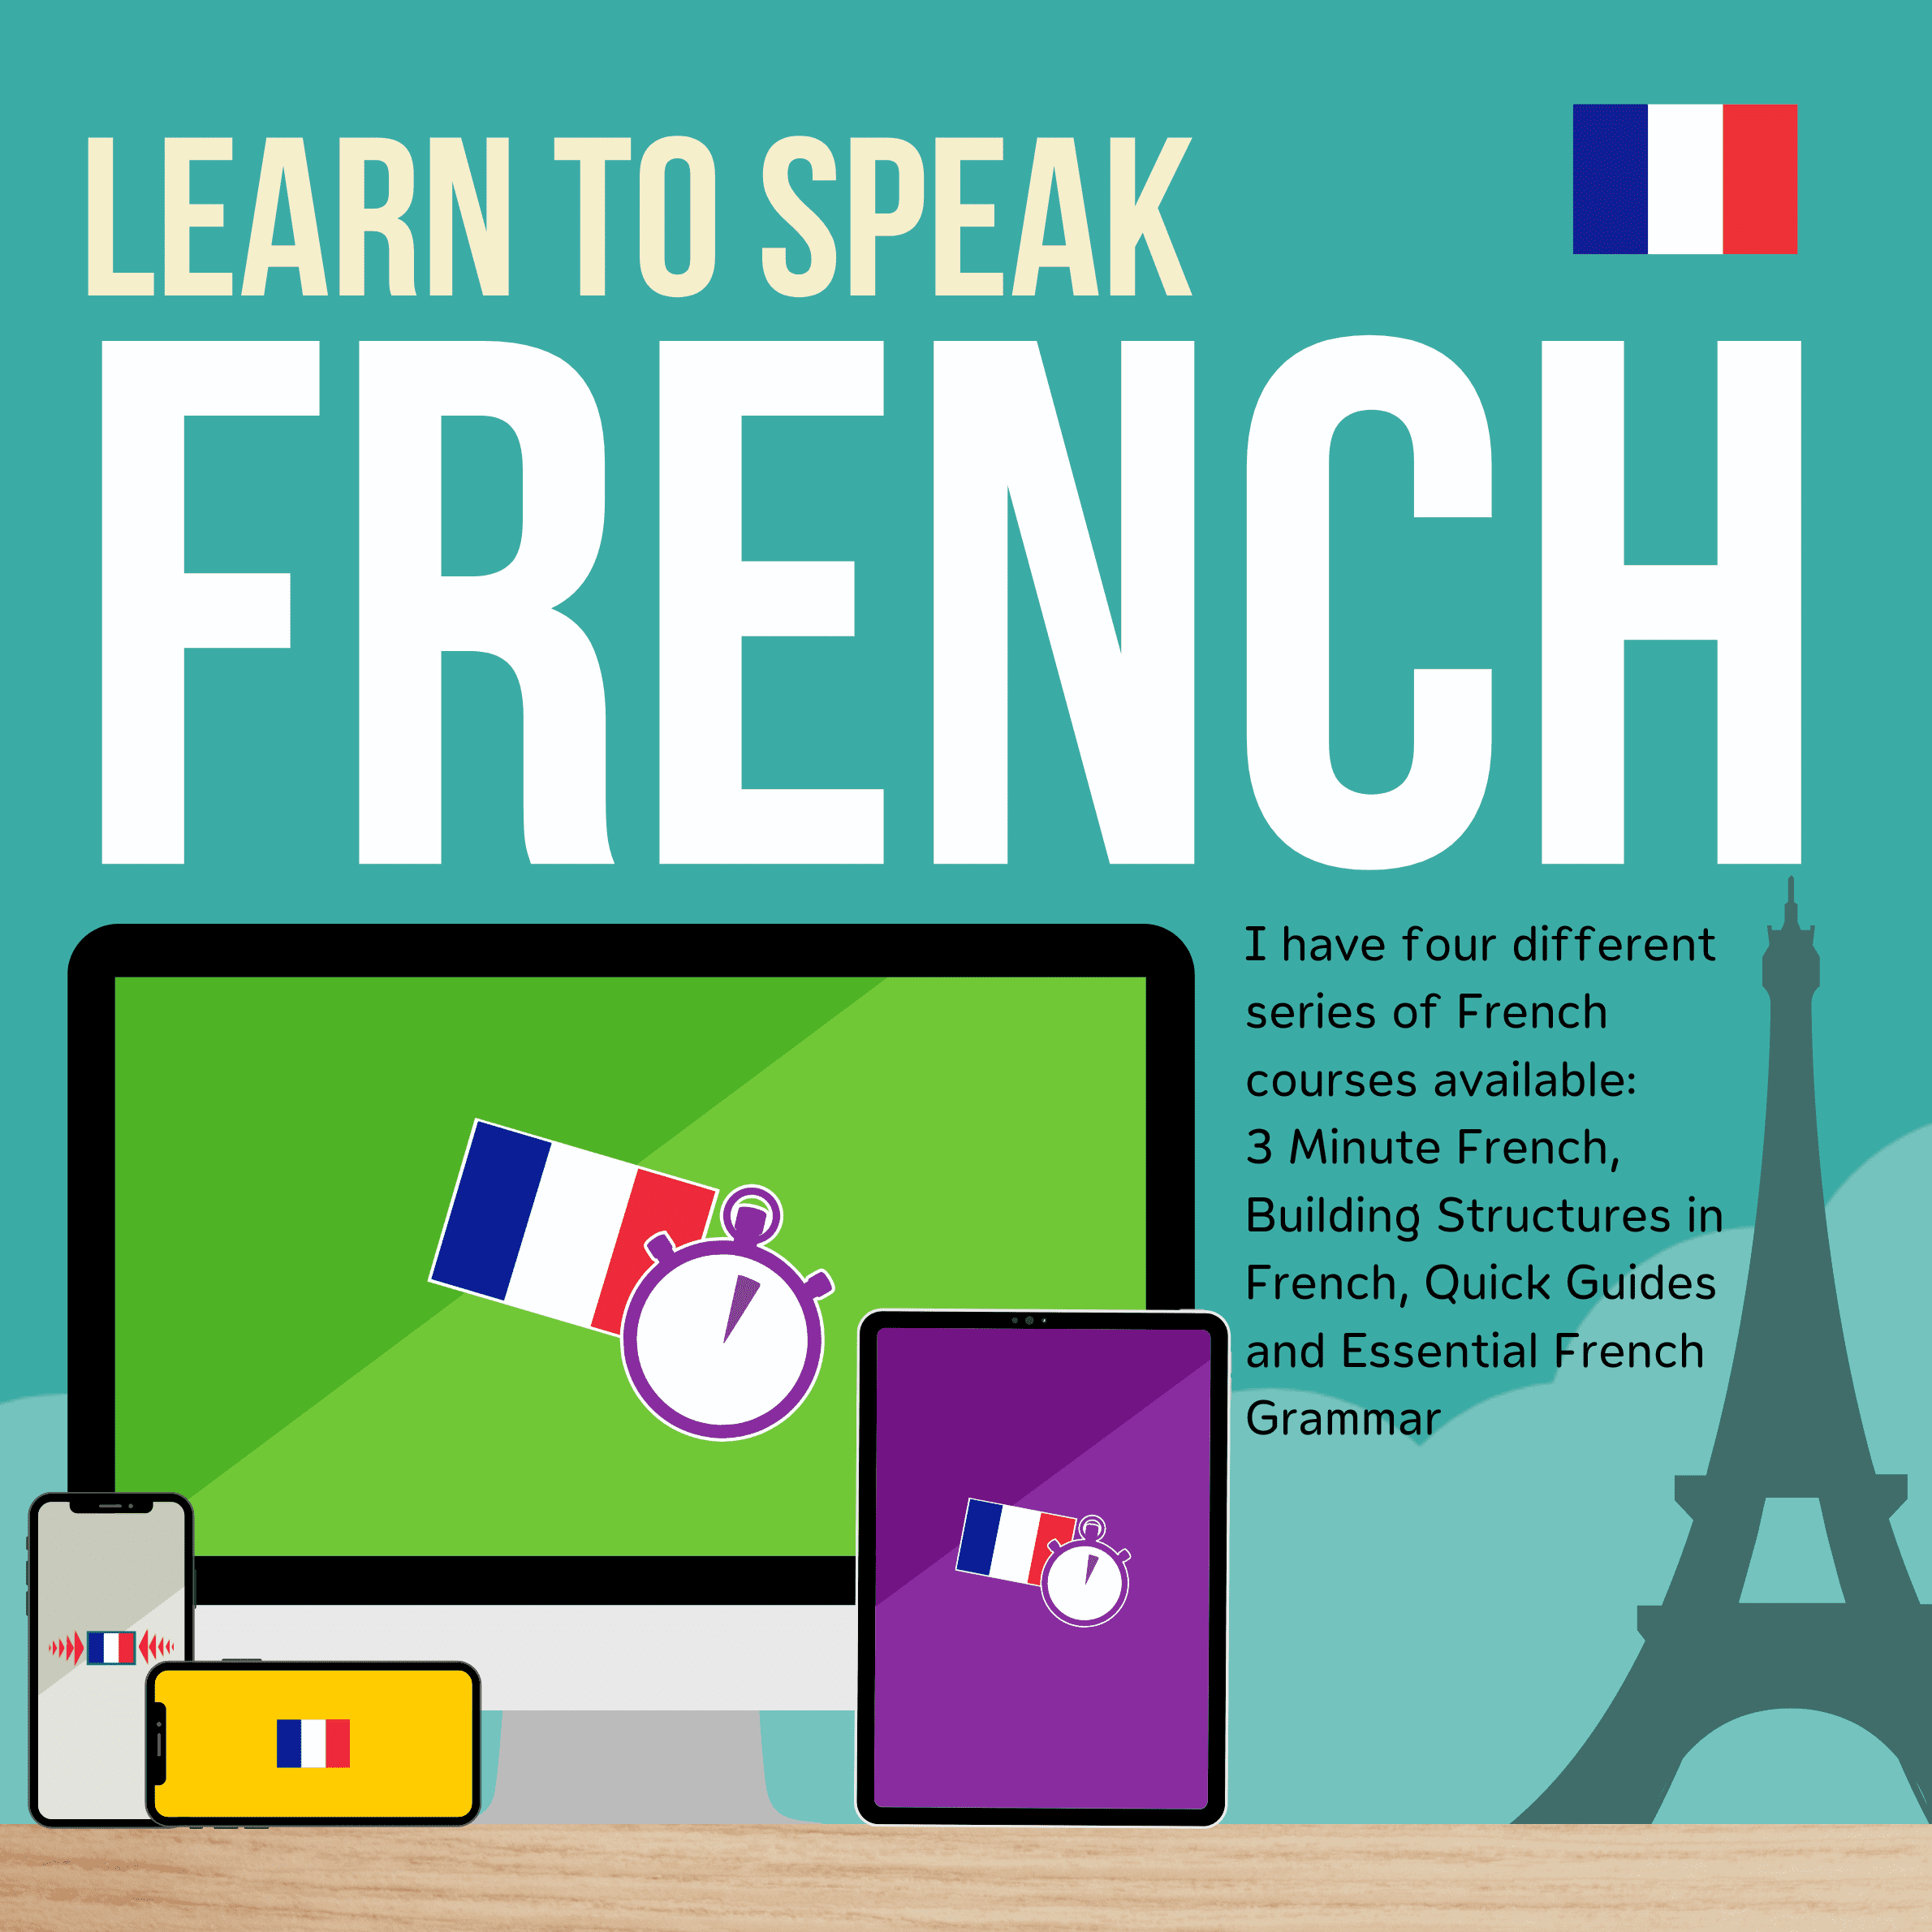 Learn to speak French